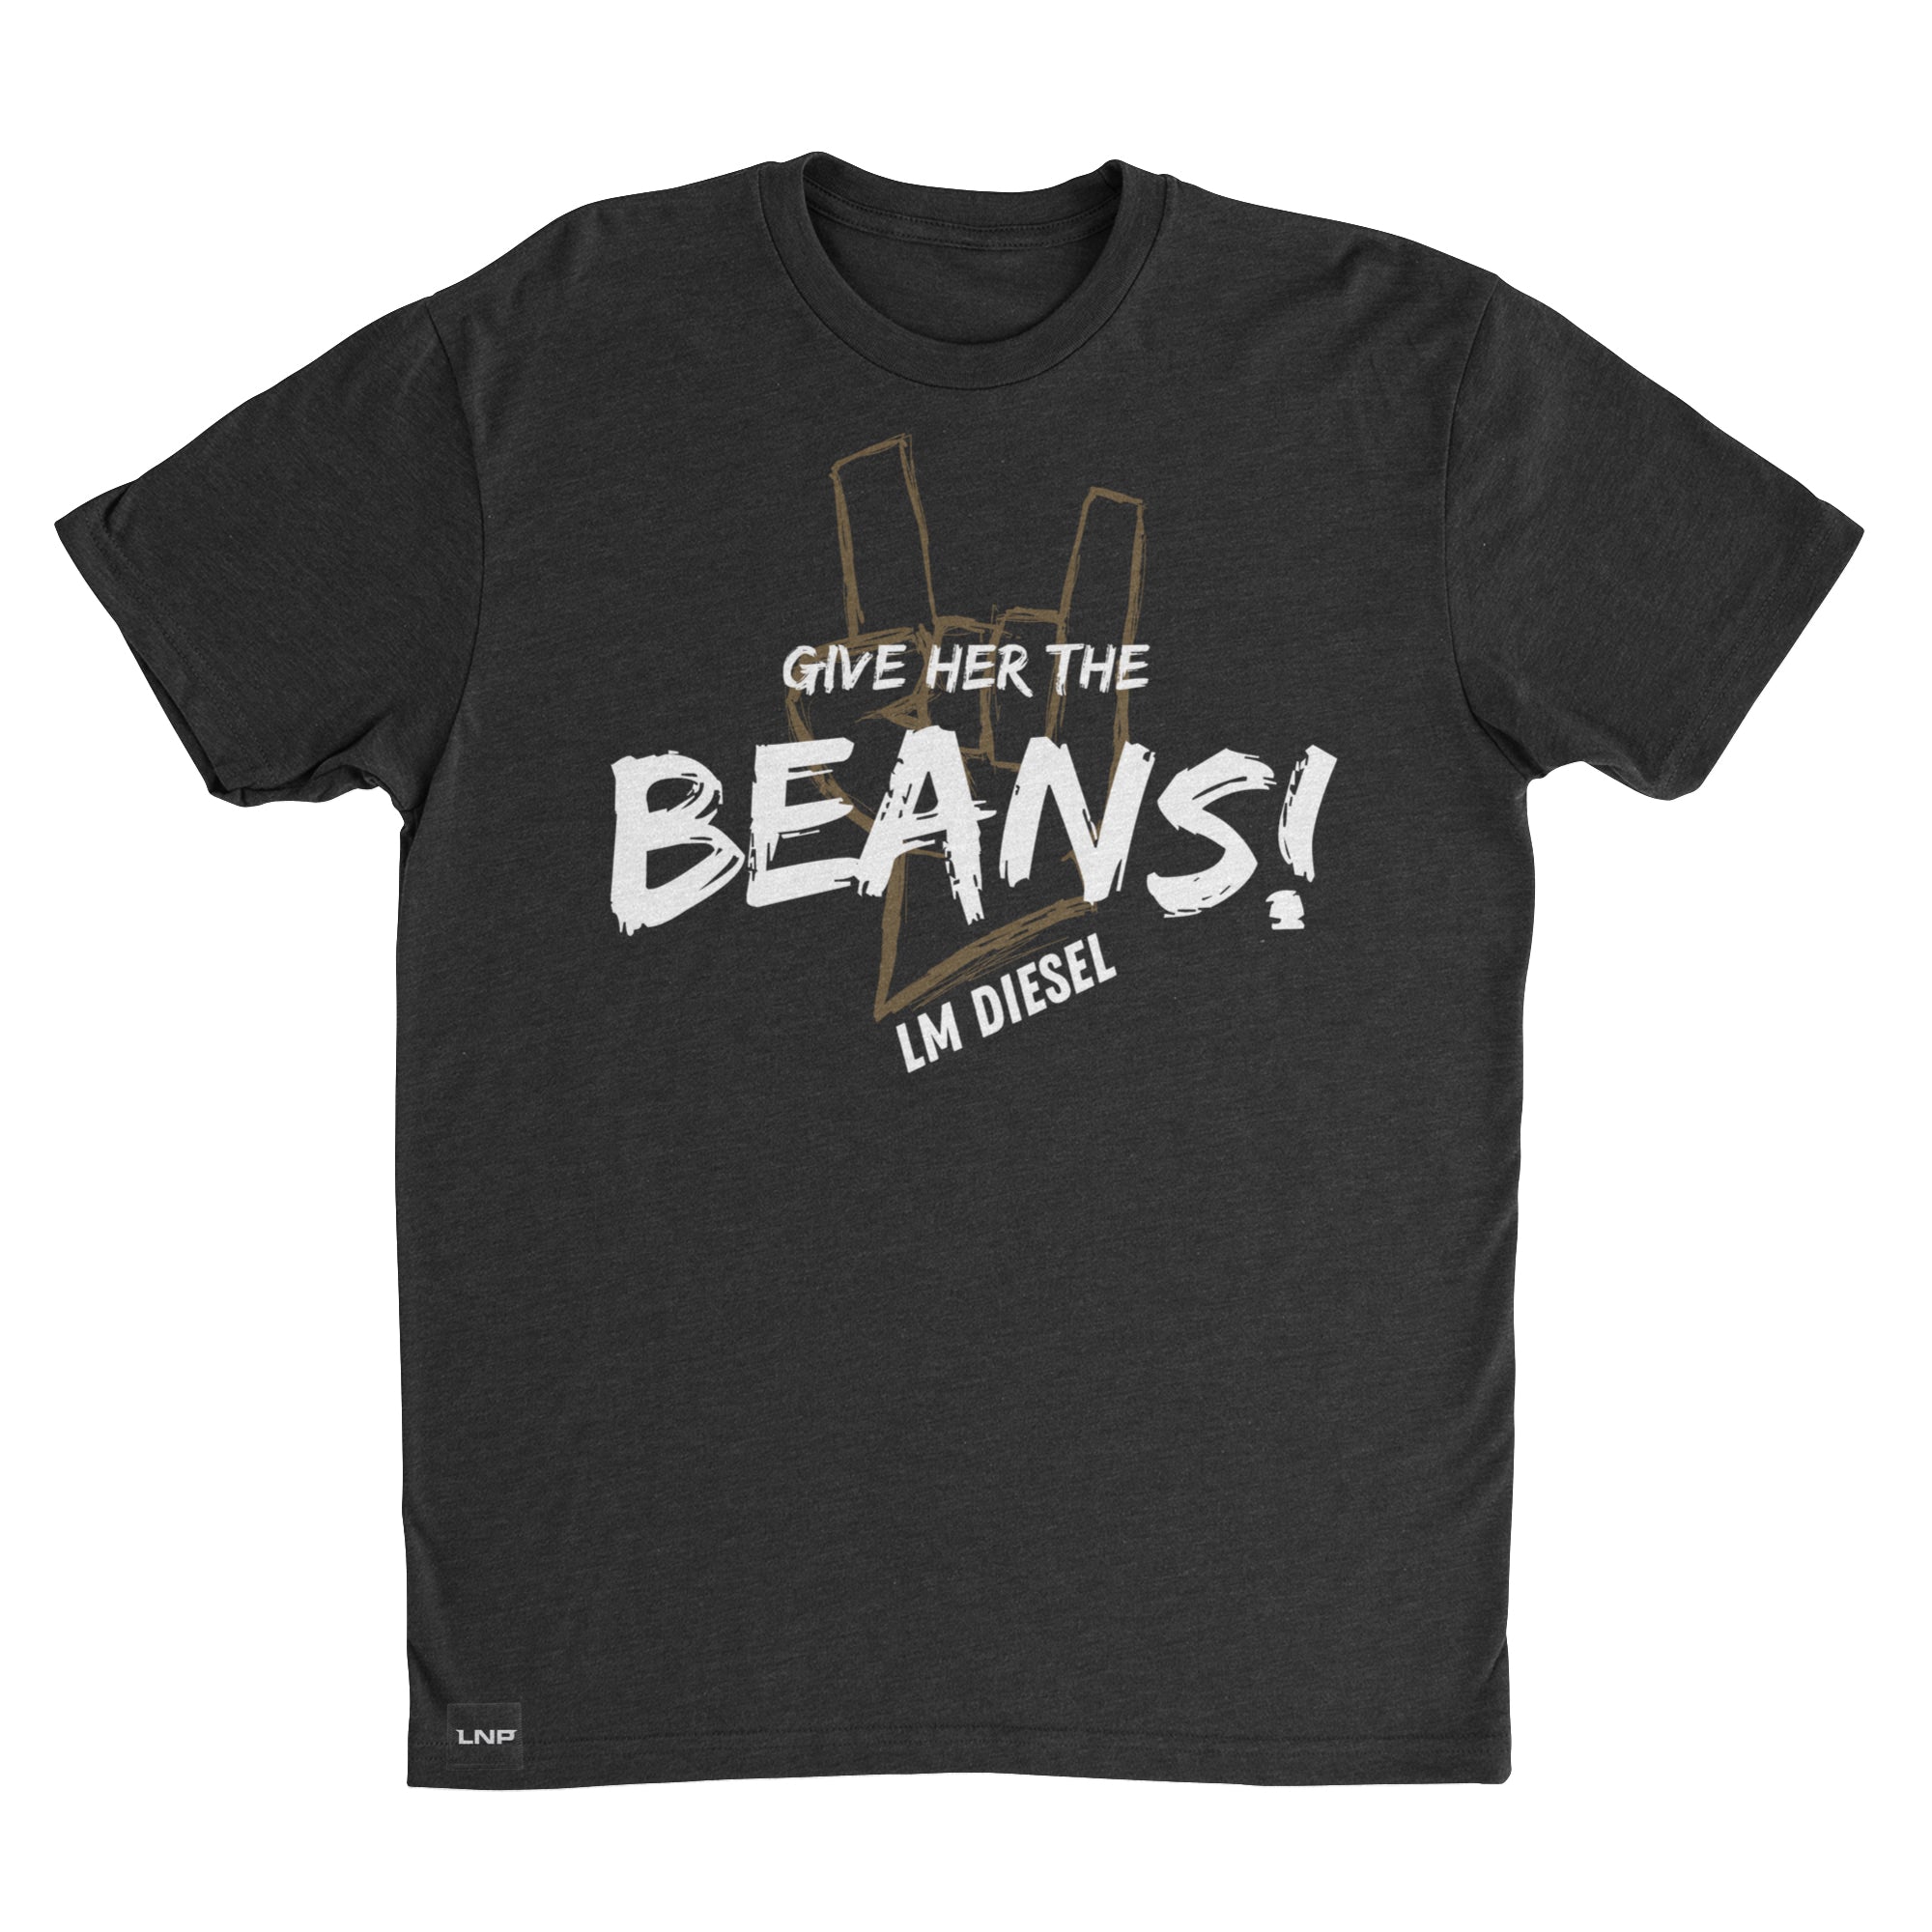 GIVE HER THE BEANS